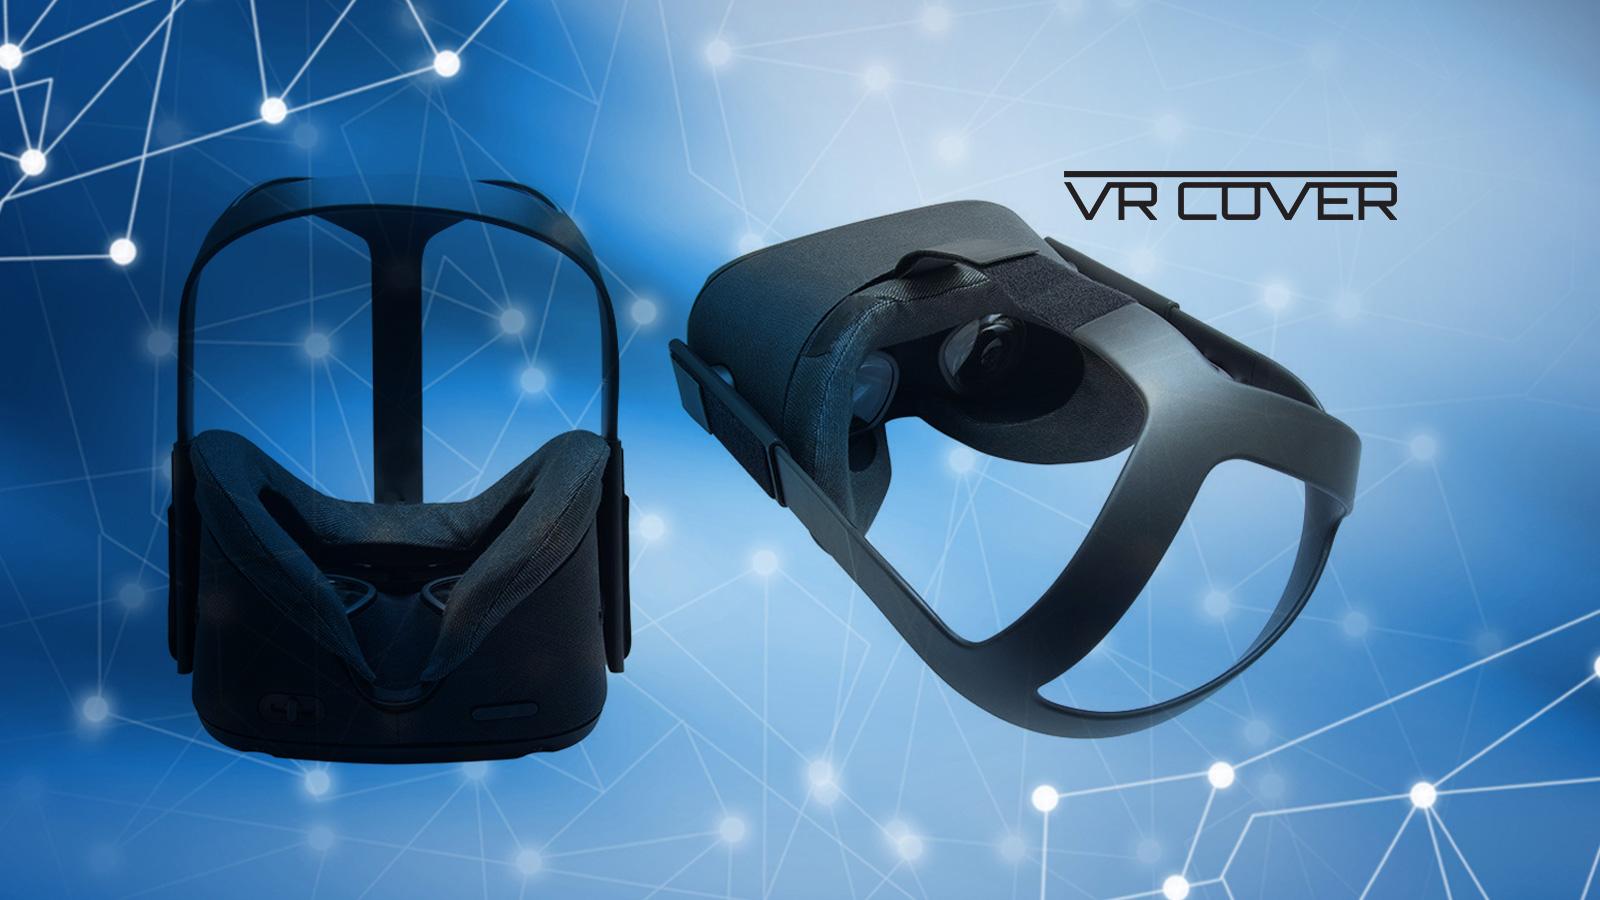 New Oculus Quest Accessories from VR Cover